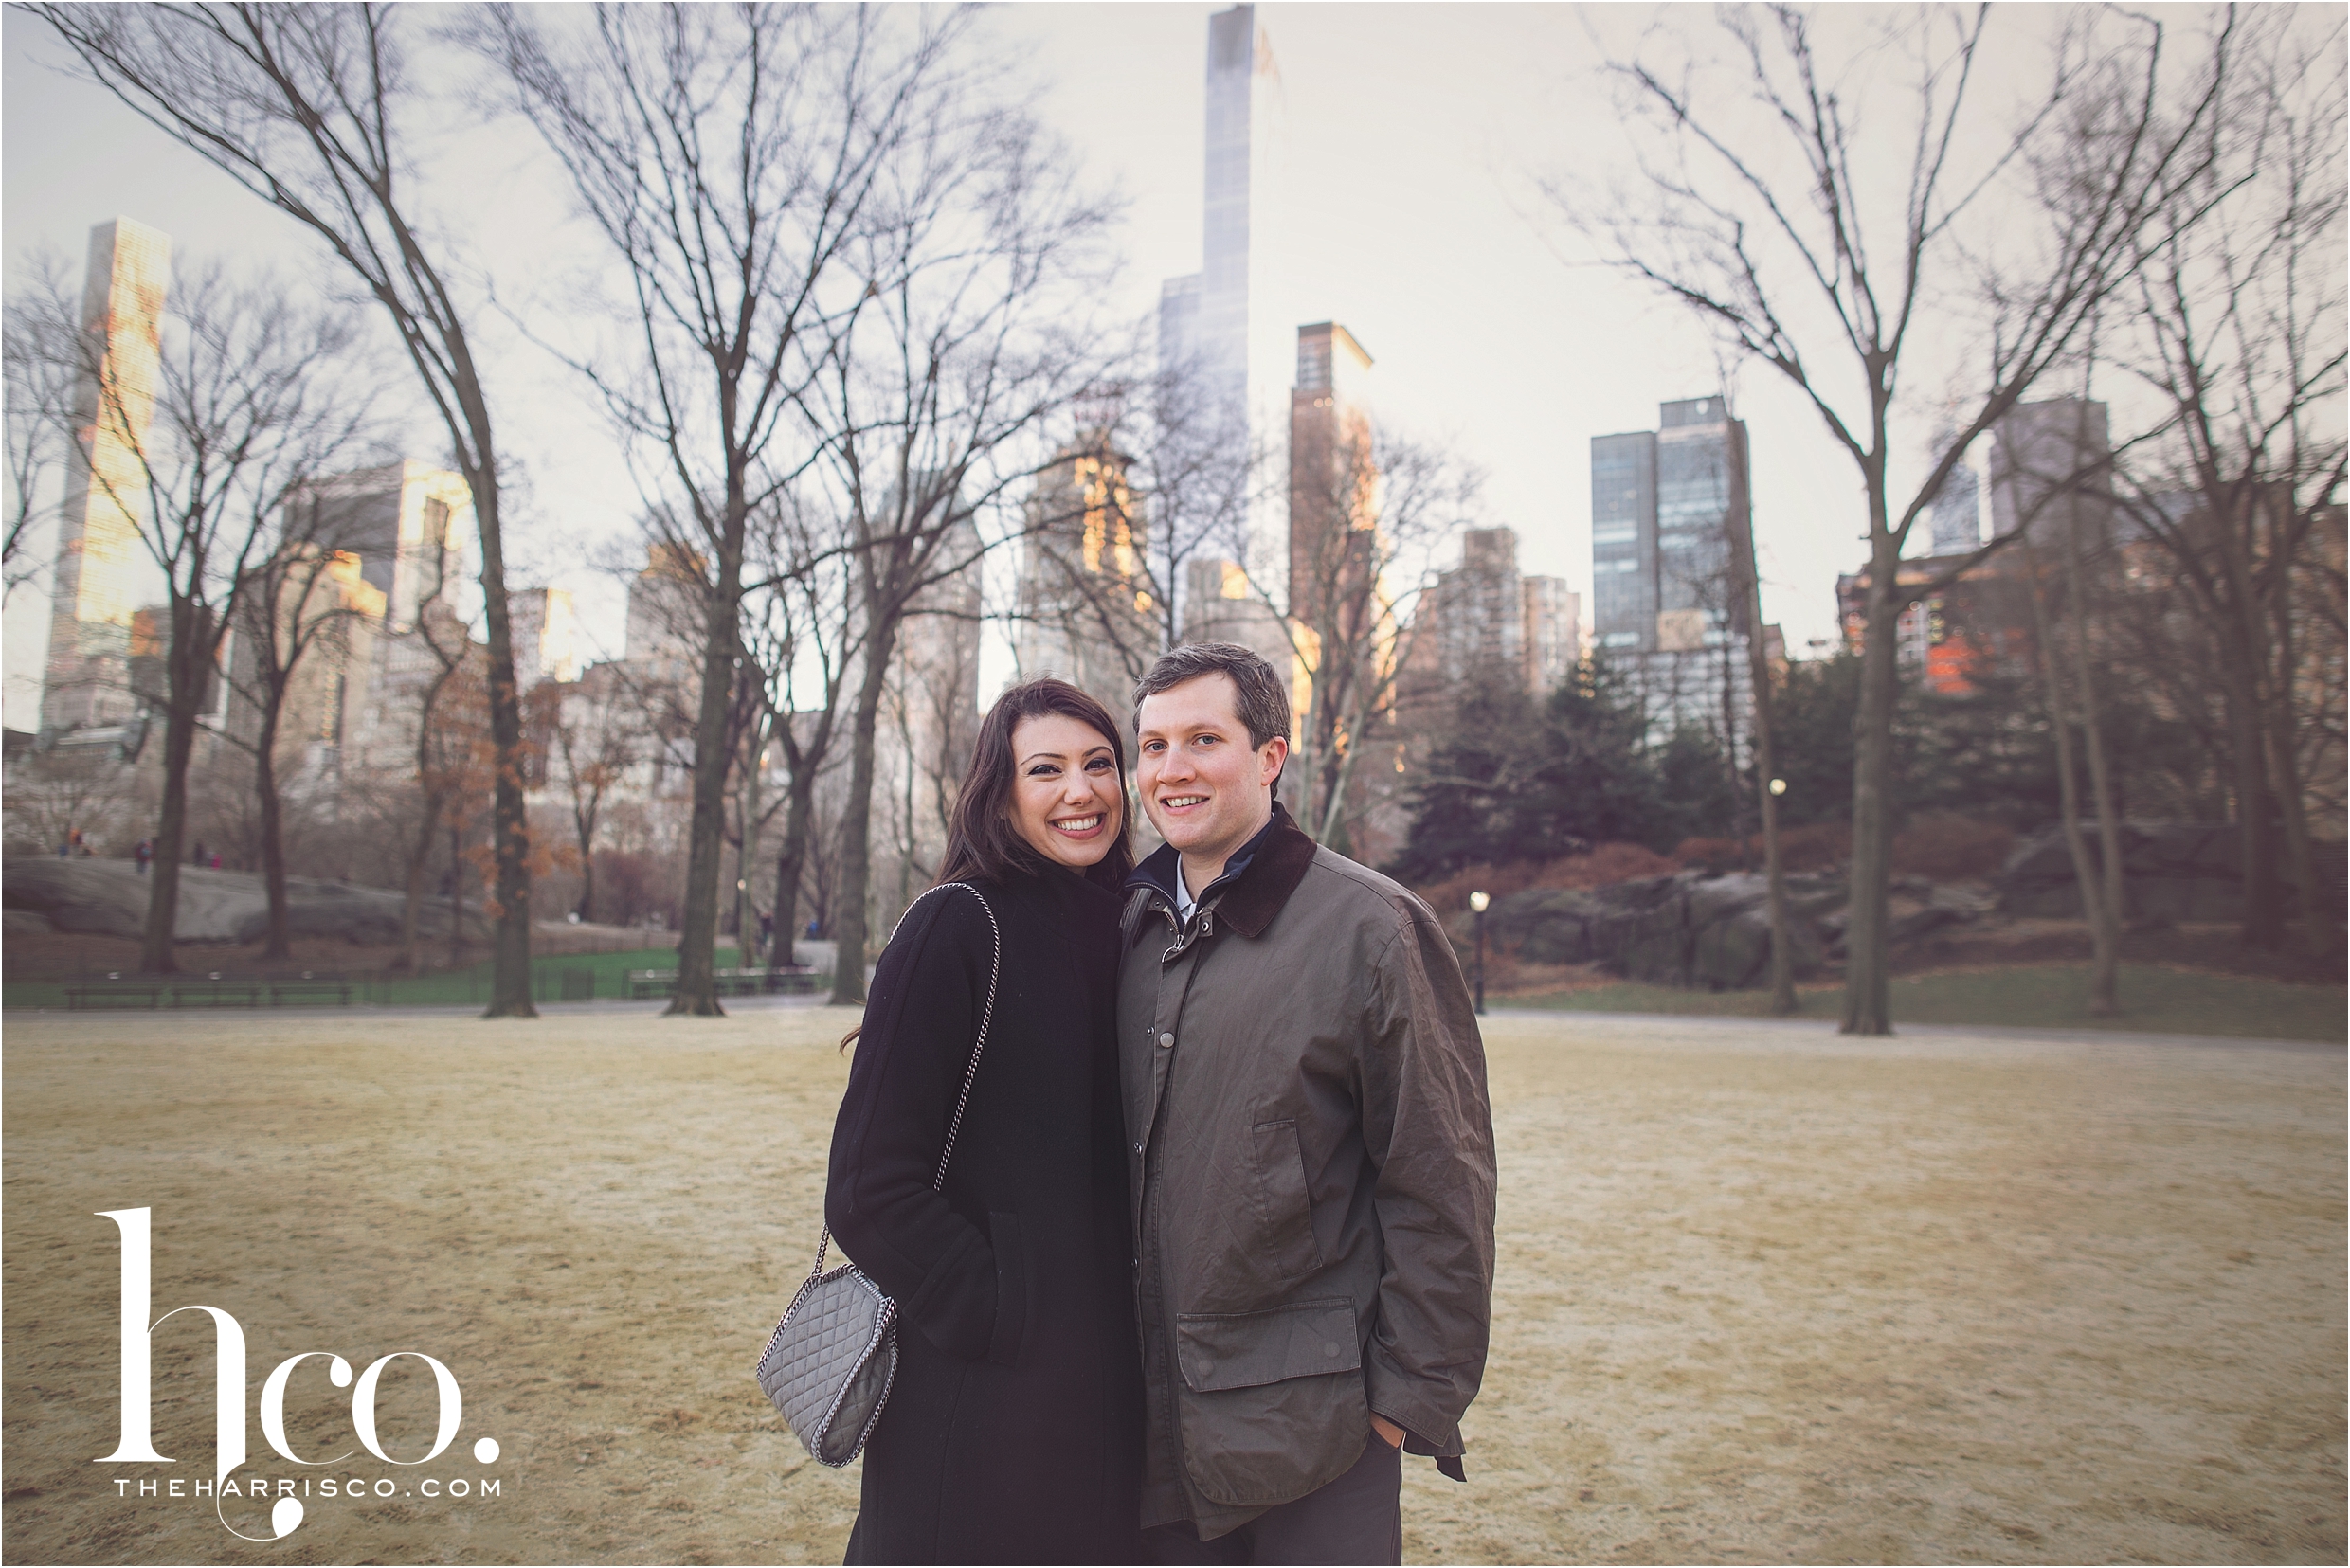 Central Park engagement session by Saratoga wedding photographer Makayla Jade of The Harris Company